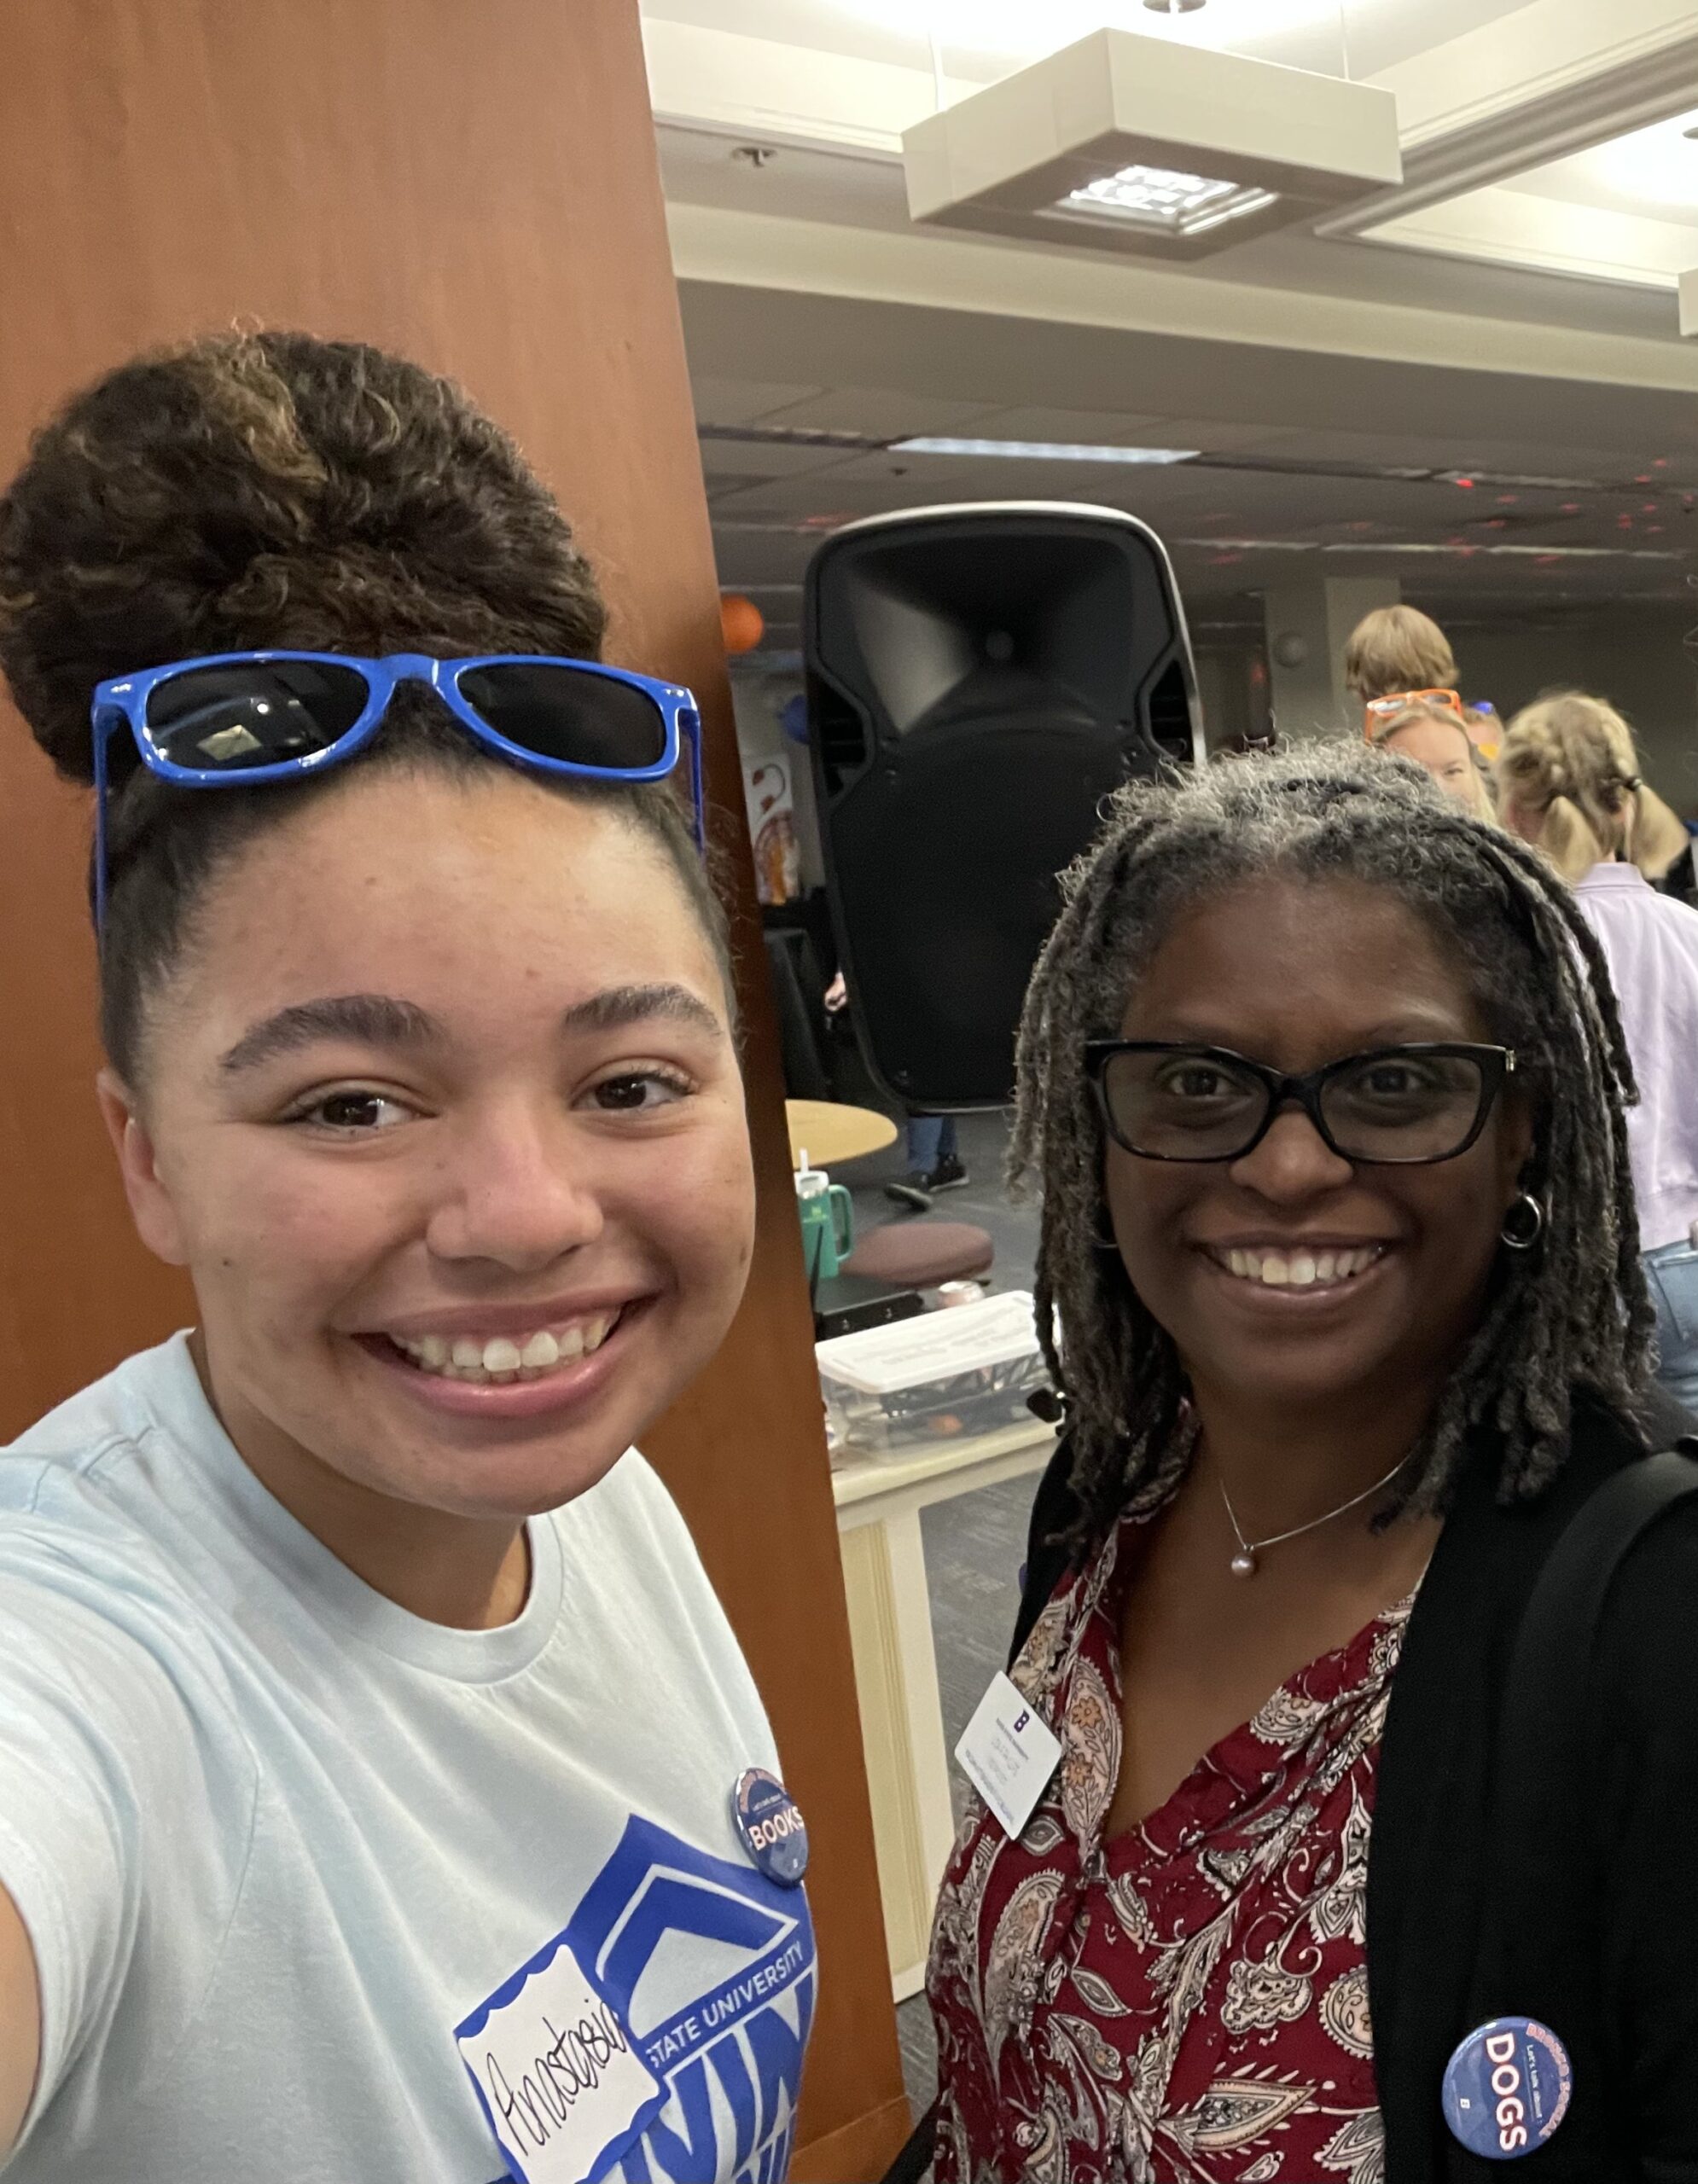 BroncoFit Living Learning Community student Anastasia Williams Burbage takes a selfie with Lisa Phillips Boise State Vice President of Communications and Belonging